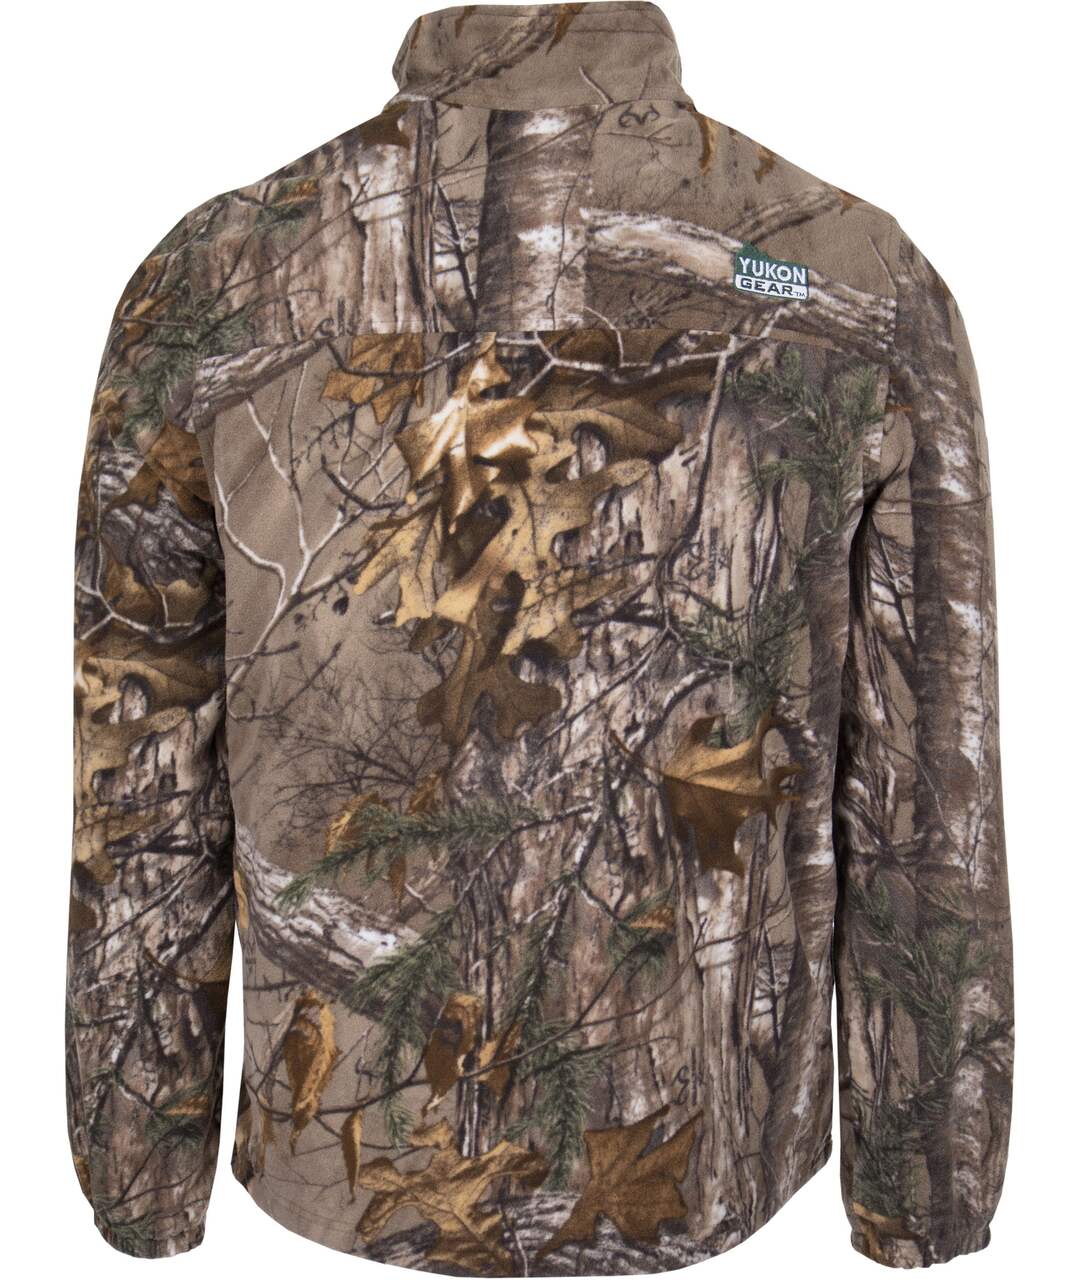 https://media-www.canadiantire.ca/product/playing/hunting/hunting-apparel-footwear/1759652/mens-waterproof-fleece-jacket-m-64b704fd-4270-44c3-b781-7a6dc511433a-jpgrendition.jpg?imdensity=1&imwidth=1244&impolicy=mZoom